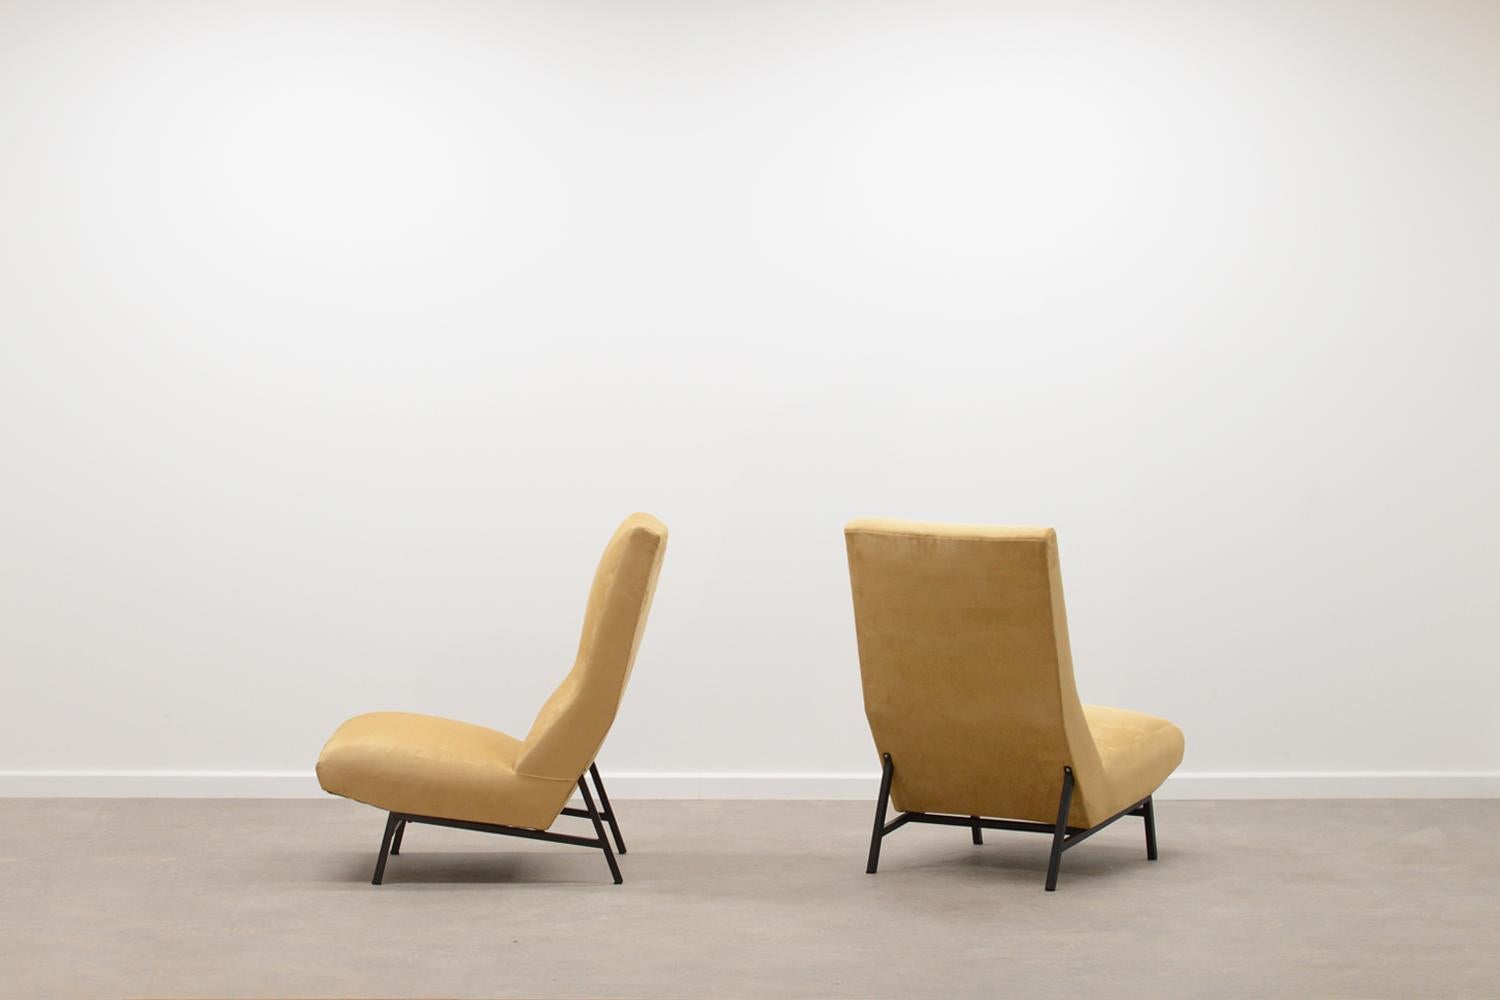 Set of 2 high back lounge chairs, 60s France. Low black metal base and reupholsteren in a suede look fabric with a gold beige color. In very good condition. Sold as a set. 

